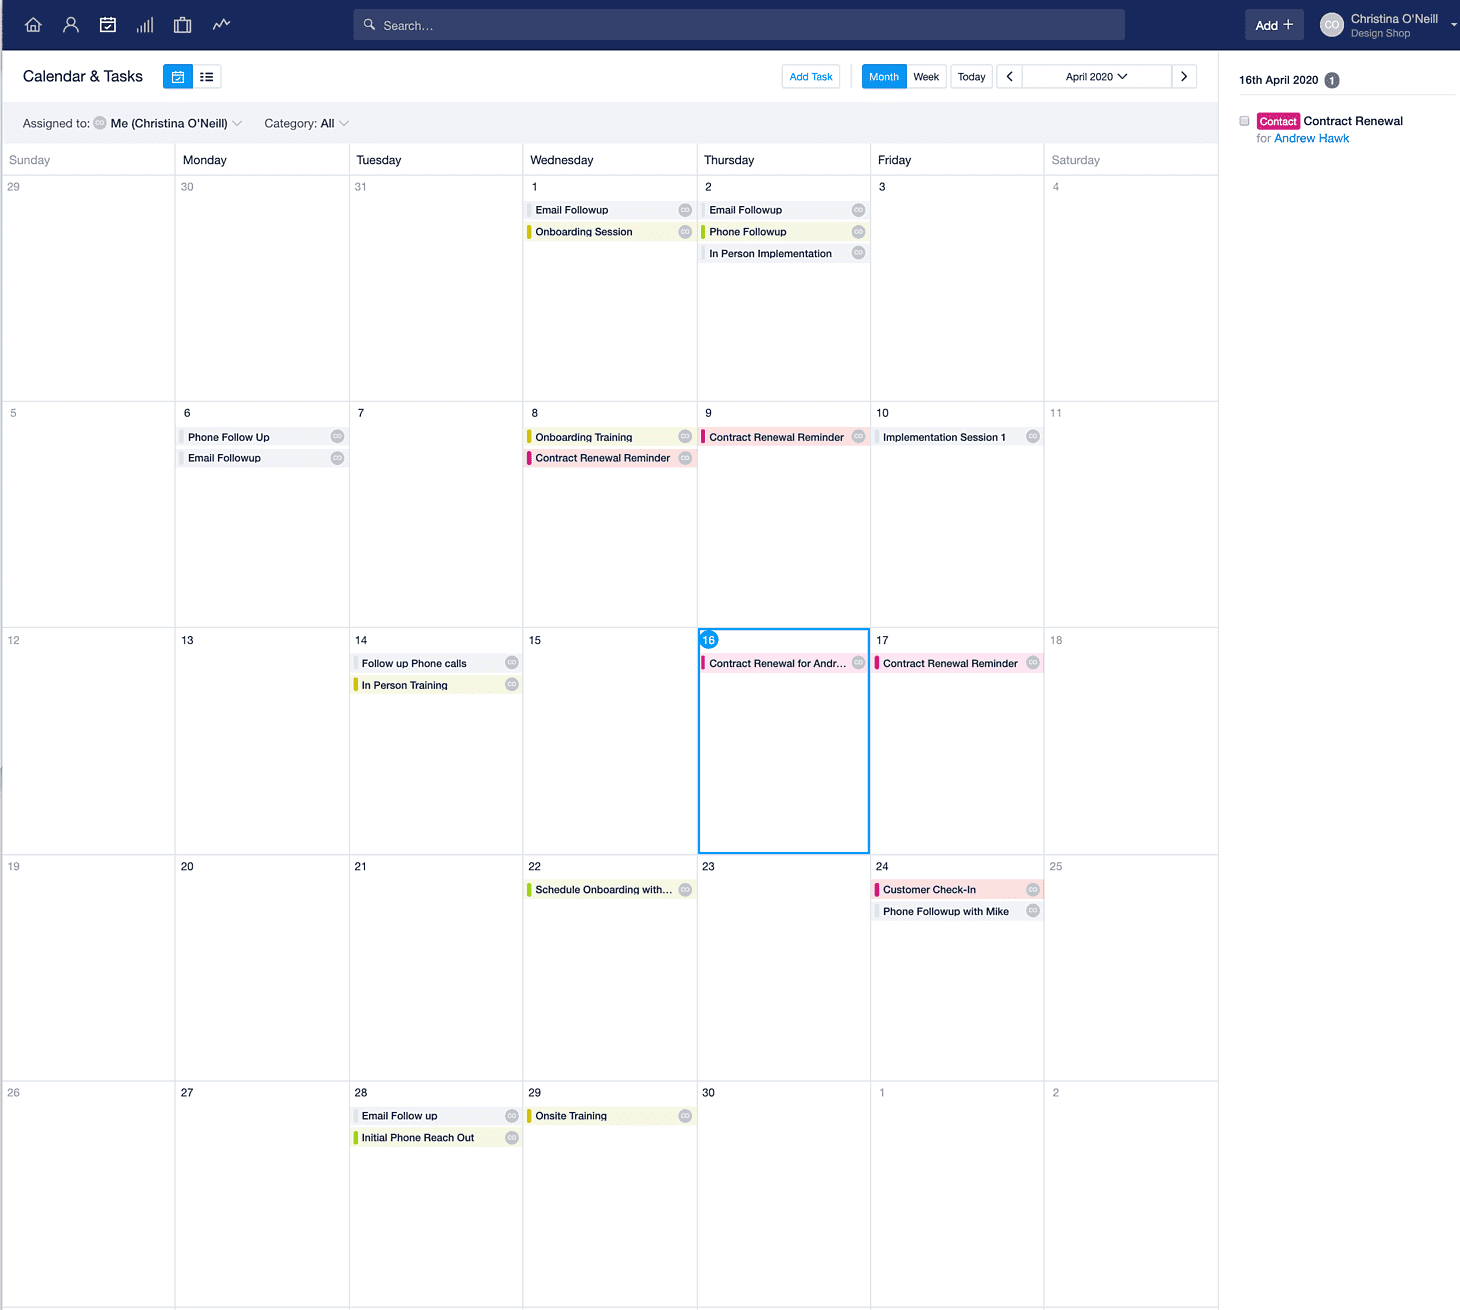 Day in Calendar view highlighted